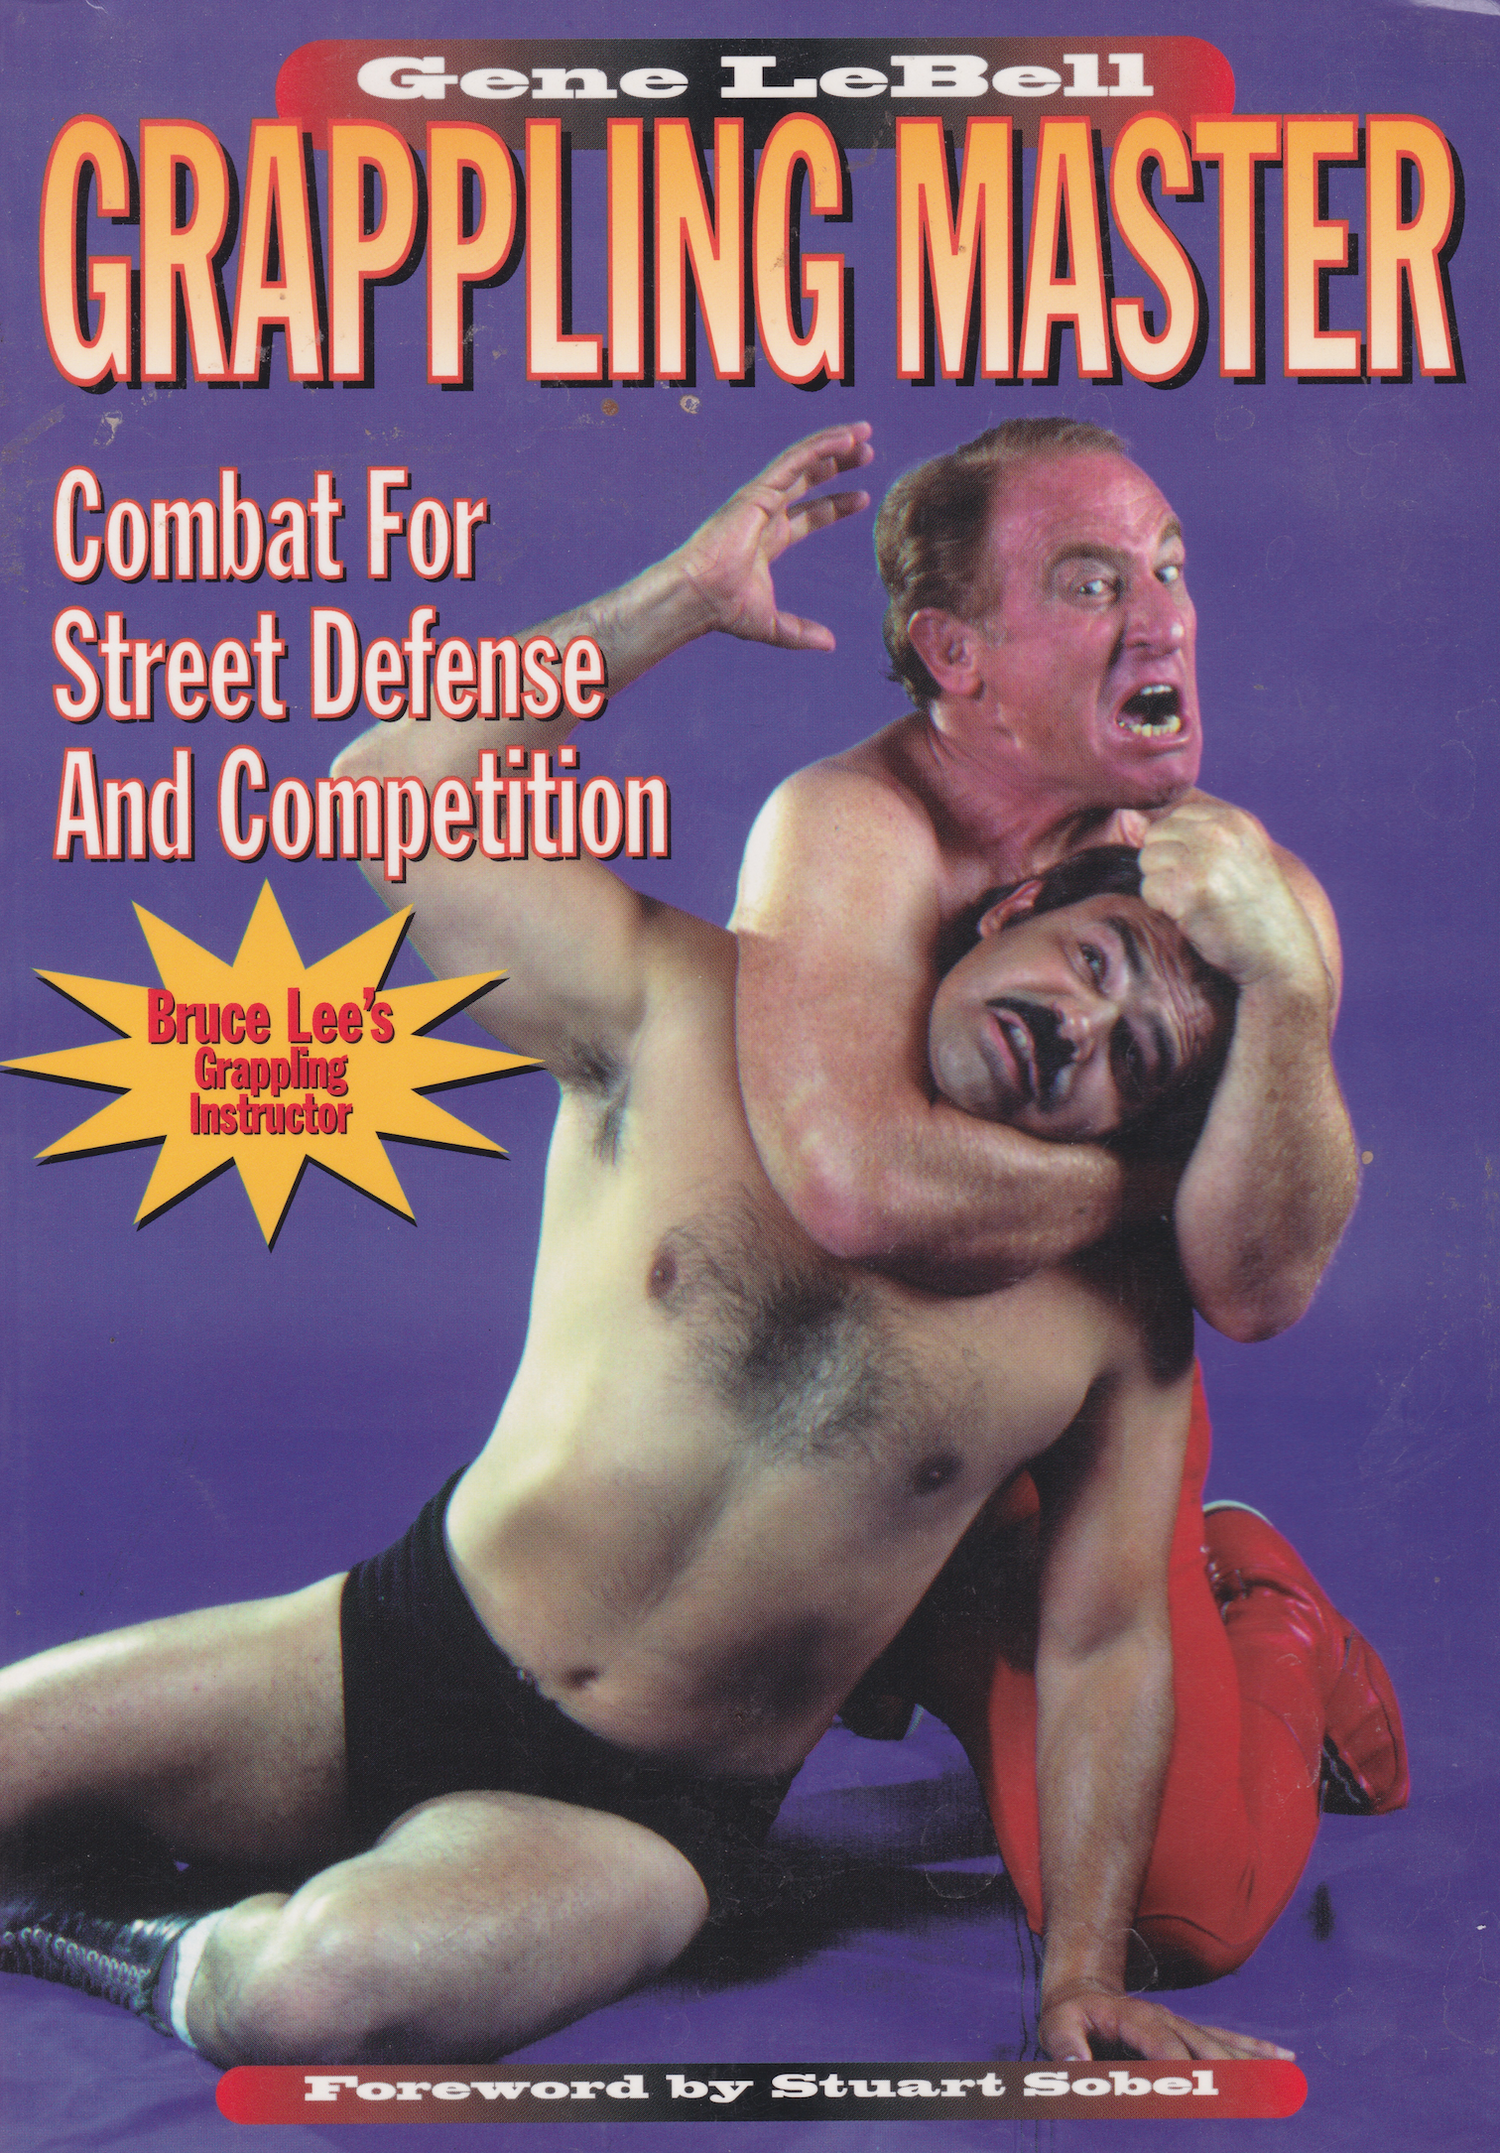 Grappling Master: Combat for Street Defense and Competition Book by Gene LeBell (Preowned)